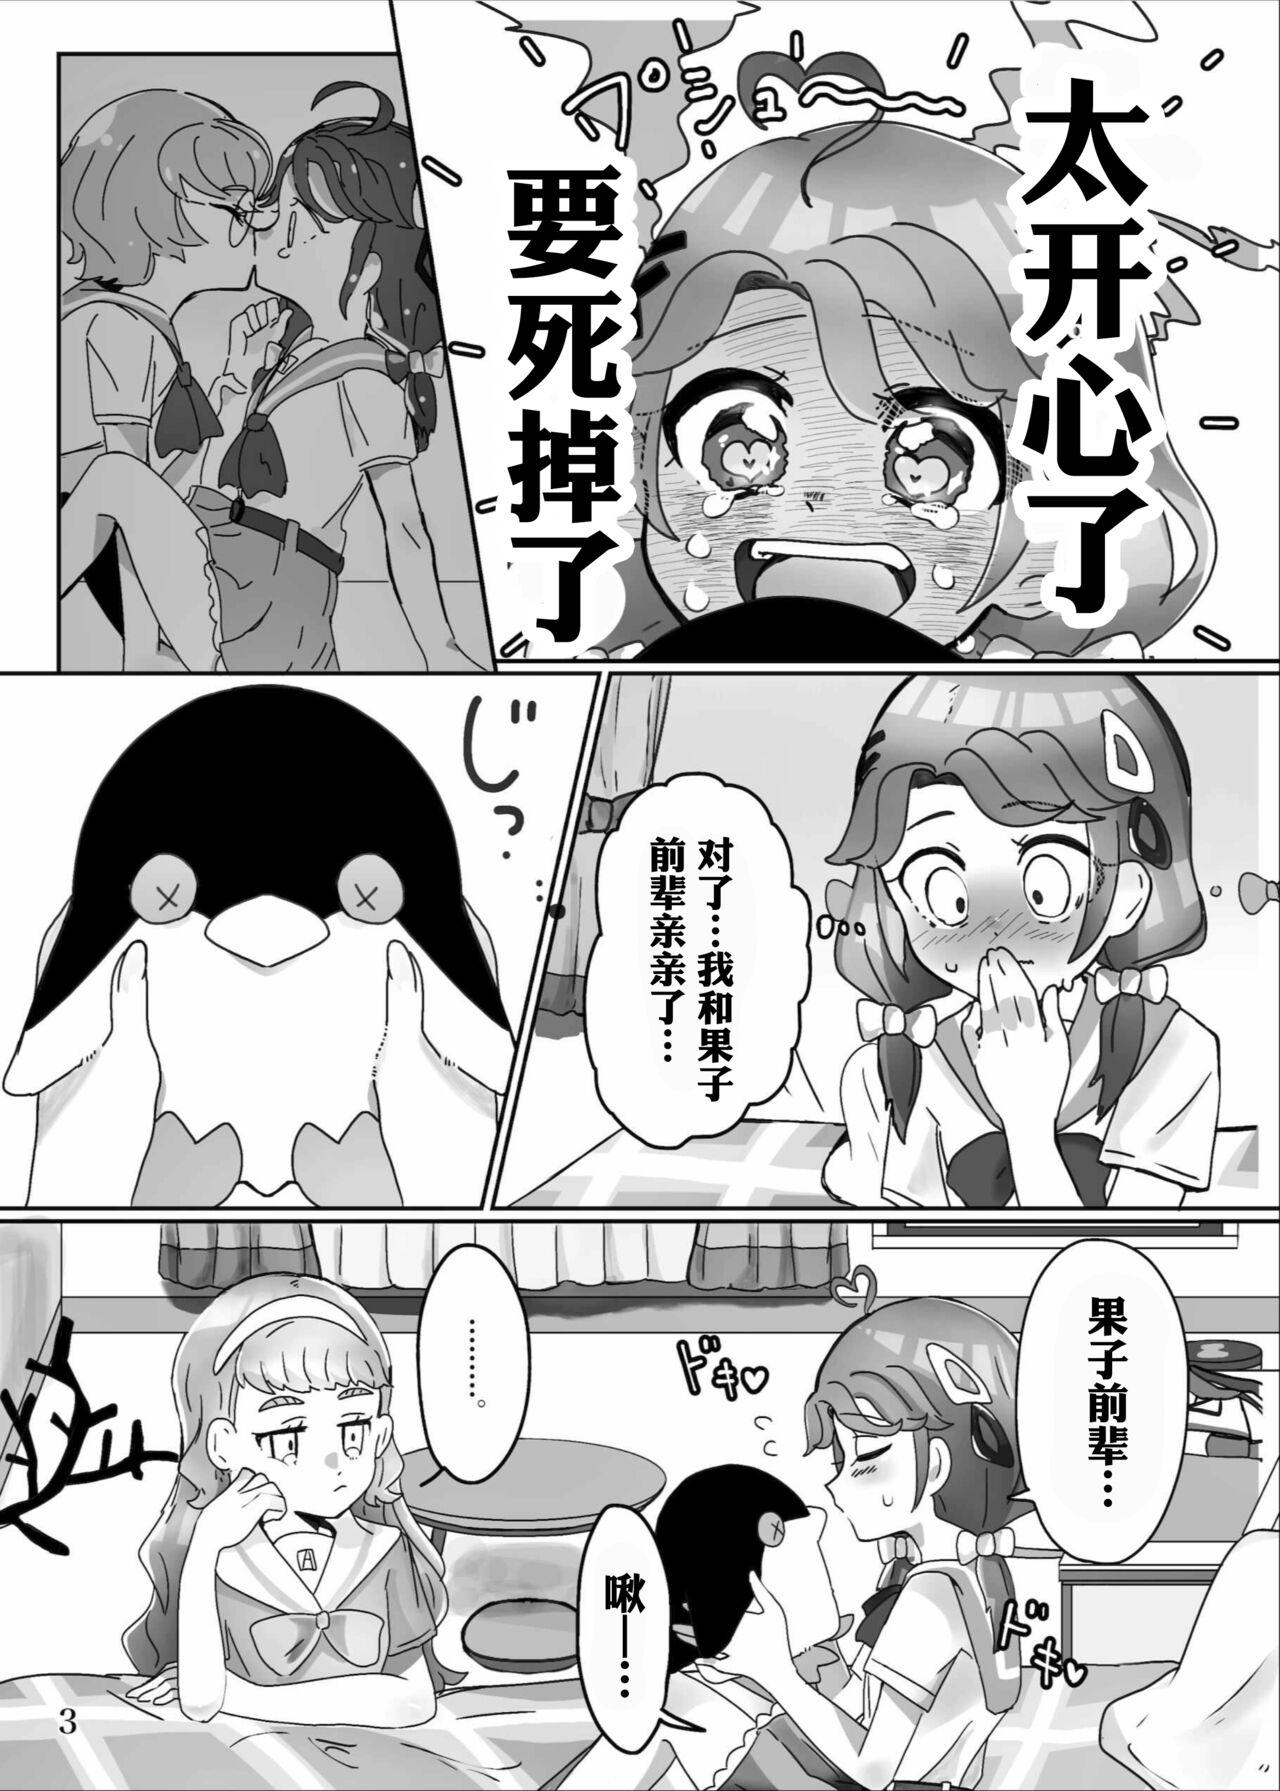 Van yaritaigotone do my best - Pretty cure Tropical rouge precure Cruising - Page 5